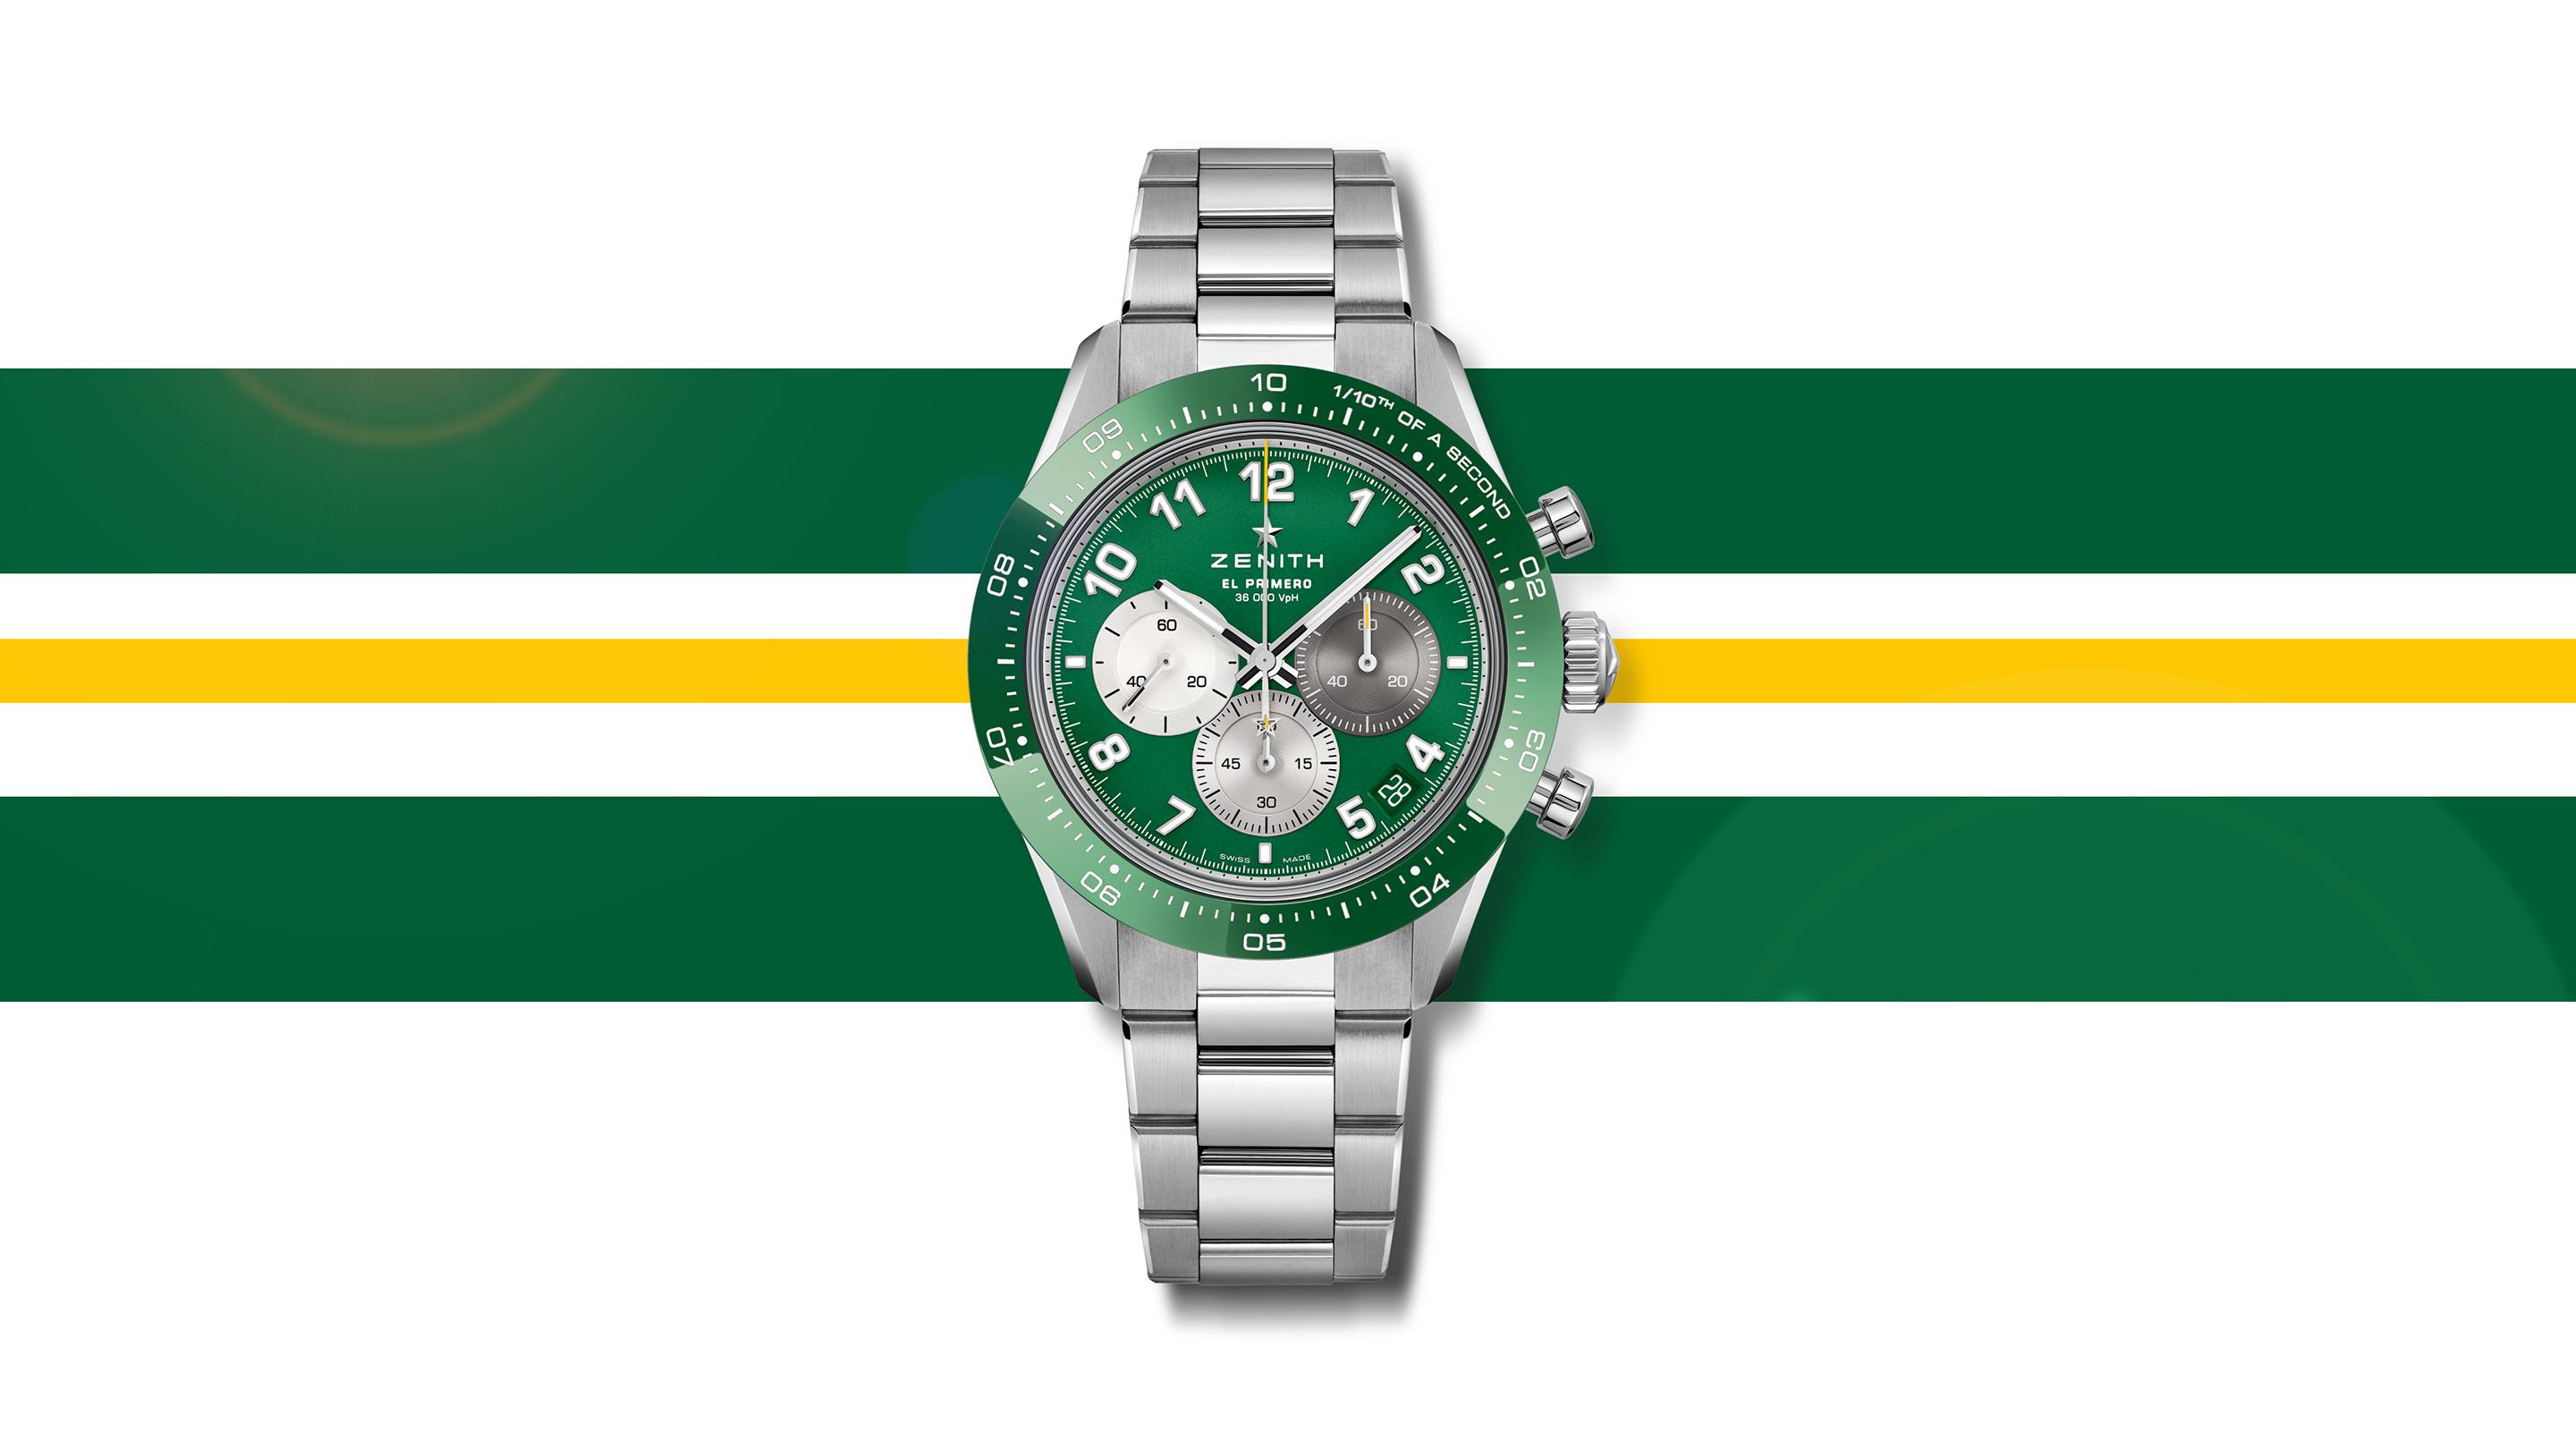 Introducing: The Zenith Chronomaster Sport 'Aaron Rodgers' Limited